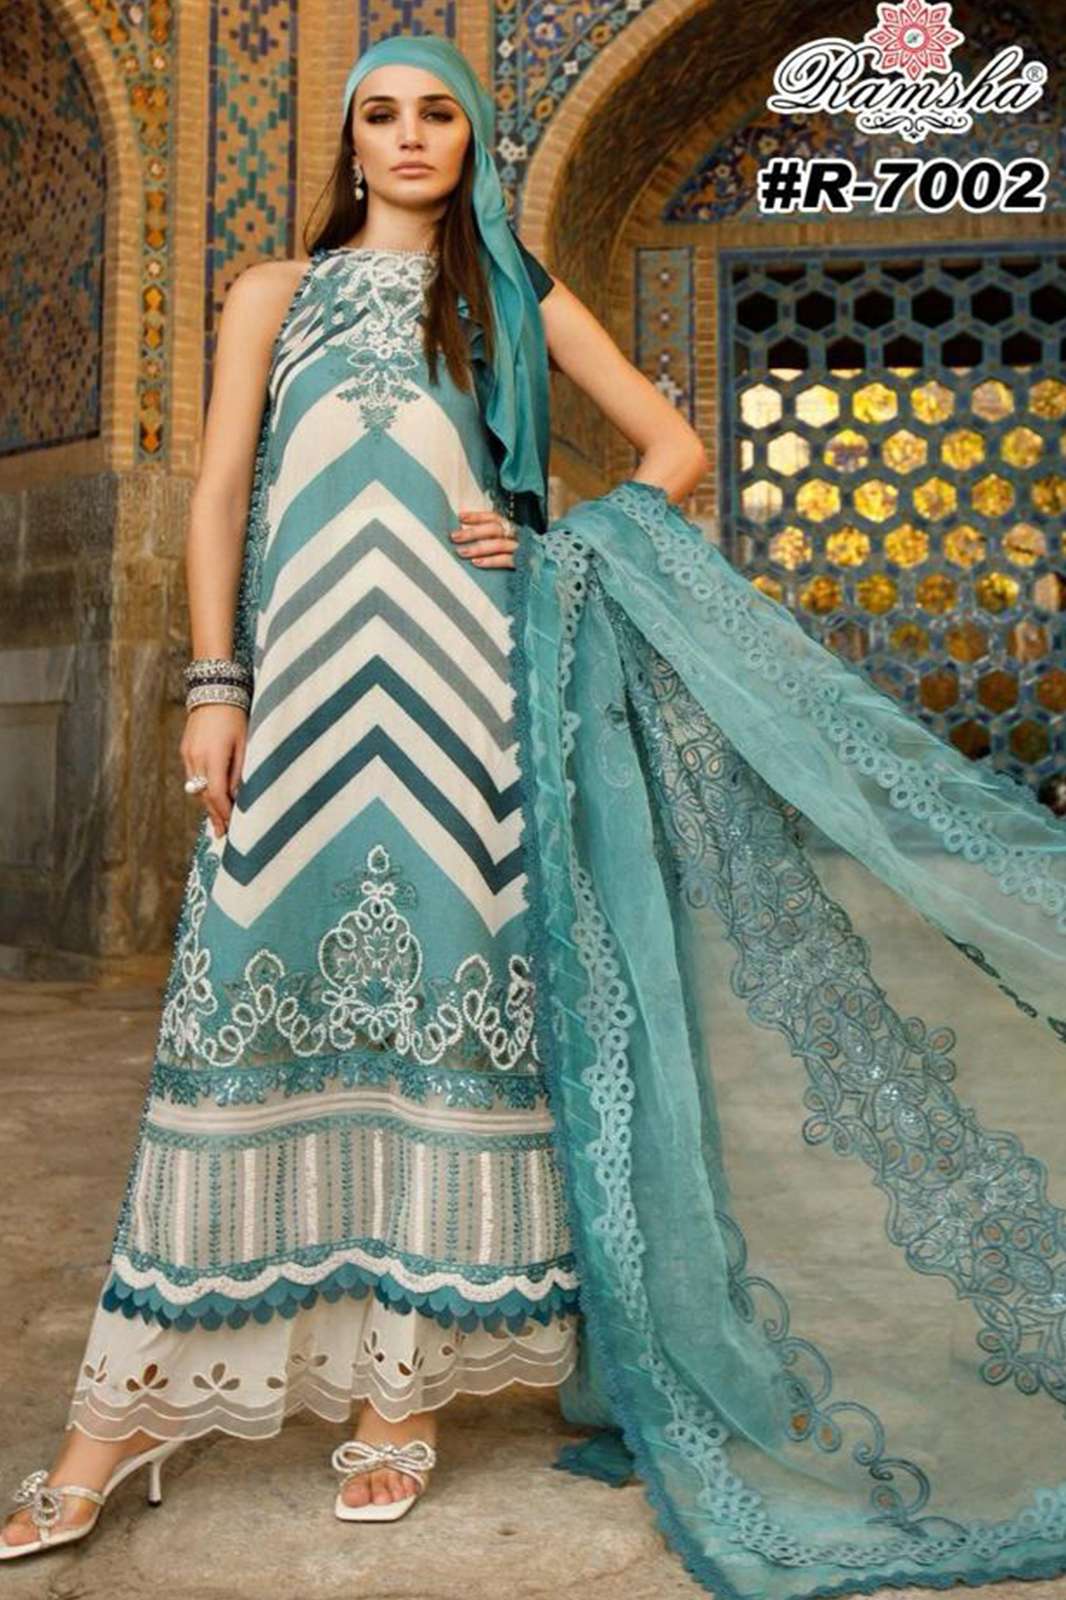 RAMSHA R-7002 & R-7003 CAMBRIC EMBROIDERY PATCH PAKISTANI SUIT IN BEAUTIFUL DESIGN